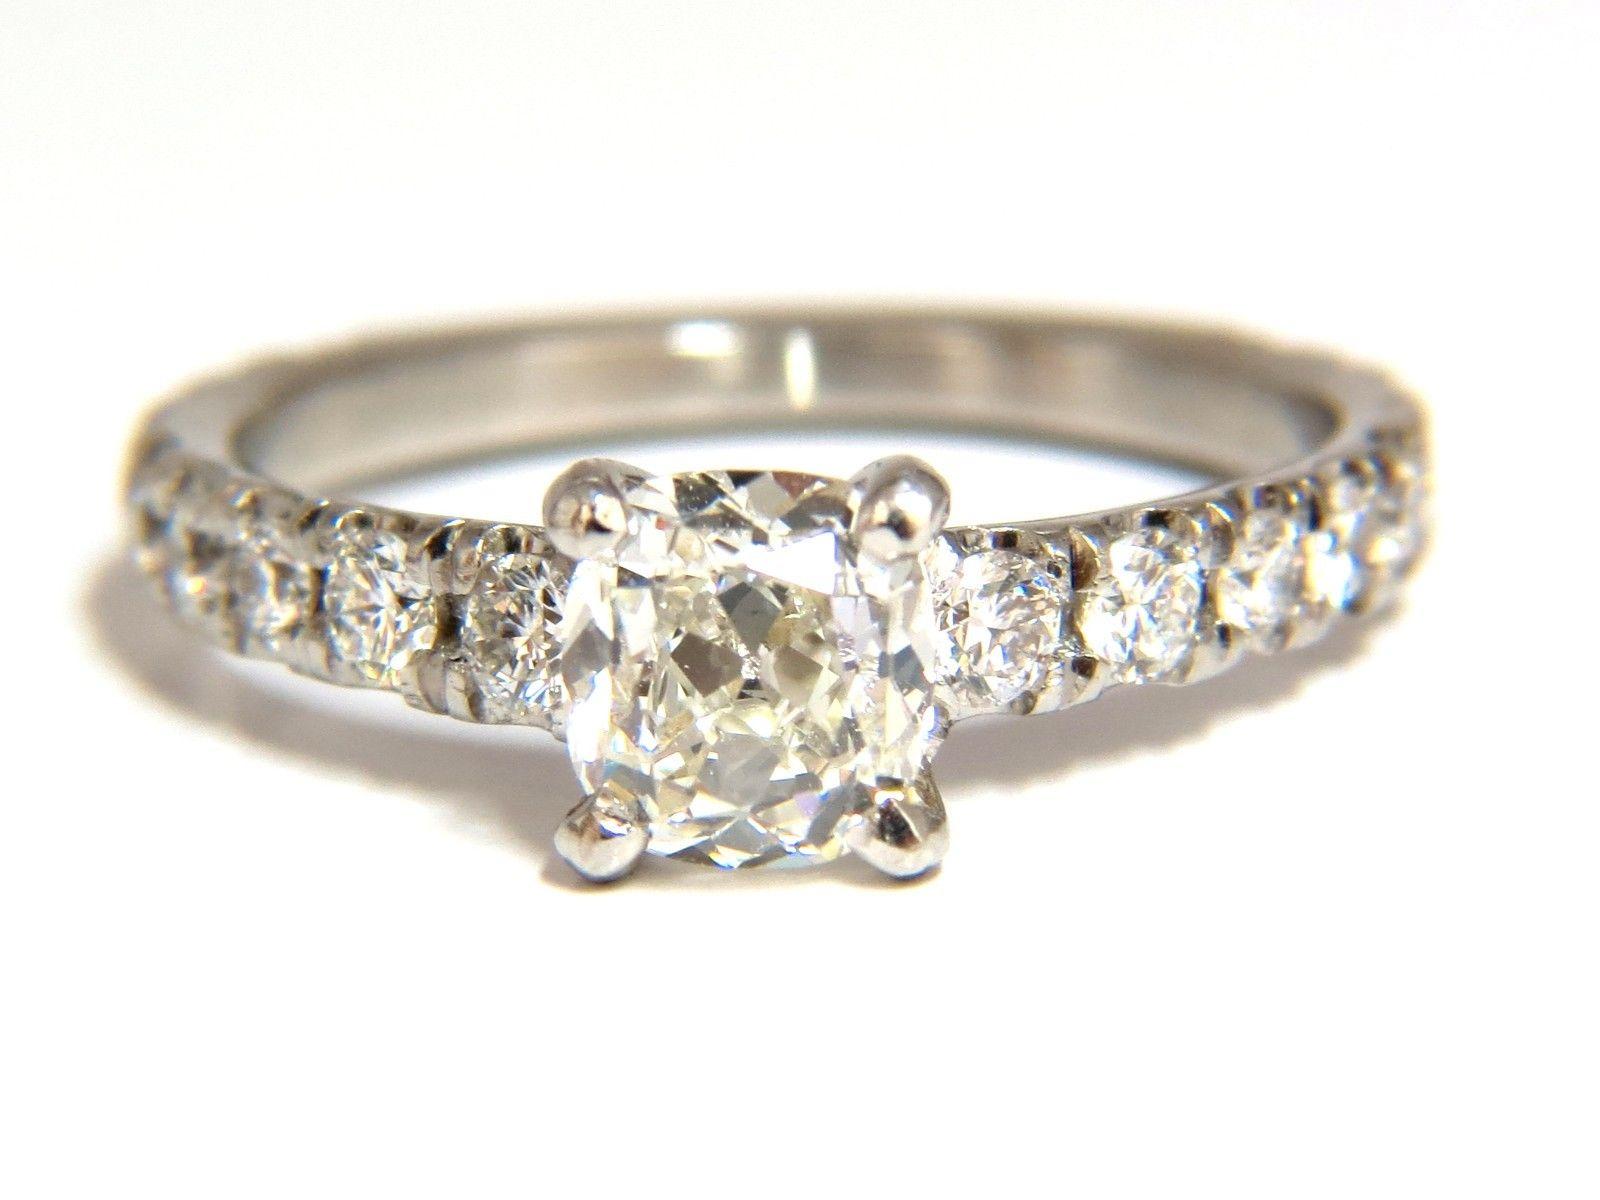 GIA 1.71 Carat Cushion Cut Diamond Ring Platinum I/VS In New Condition For Sale In New York, NY